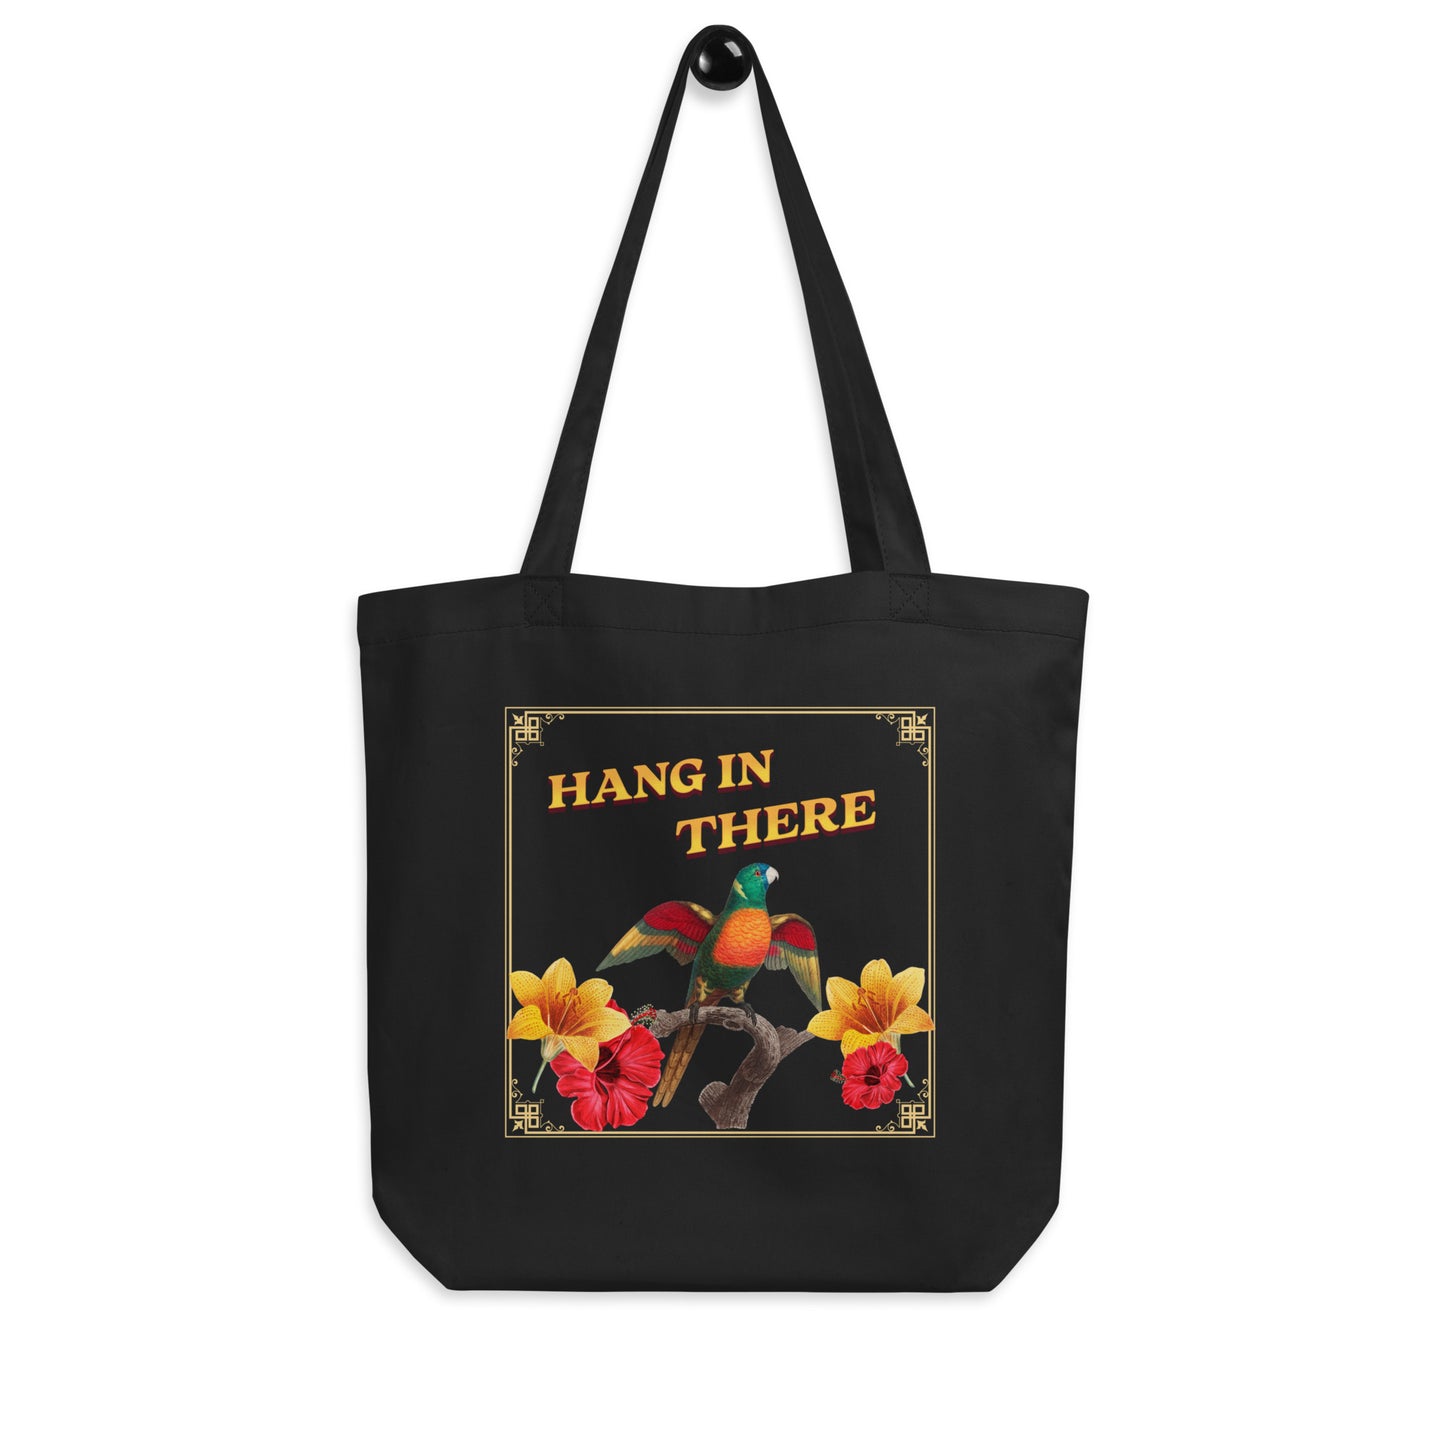 Hang In There Eco Tote